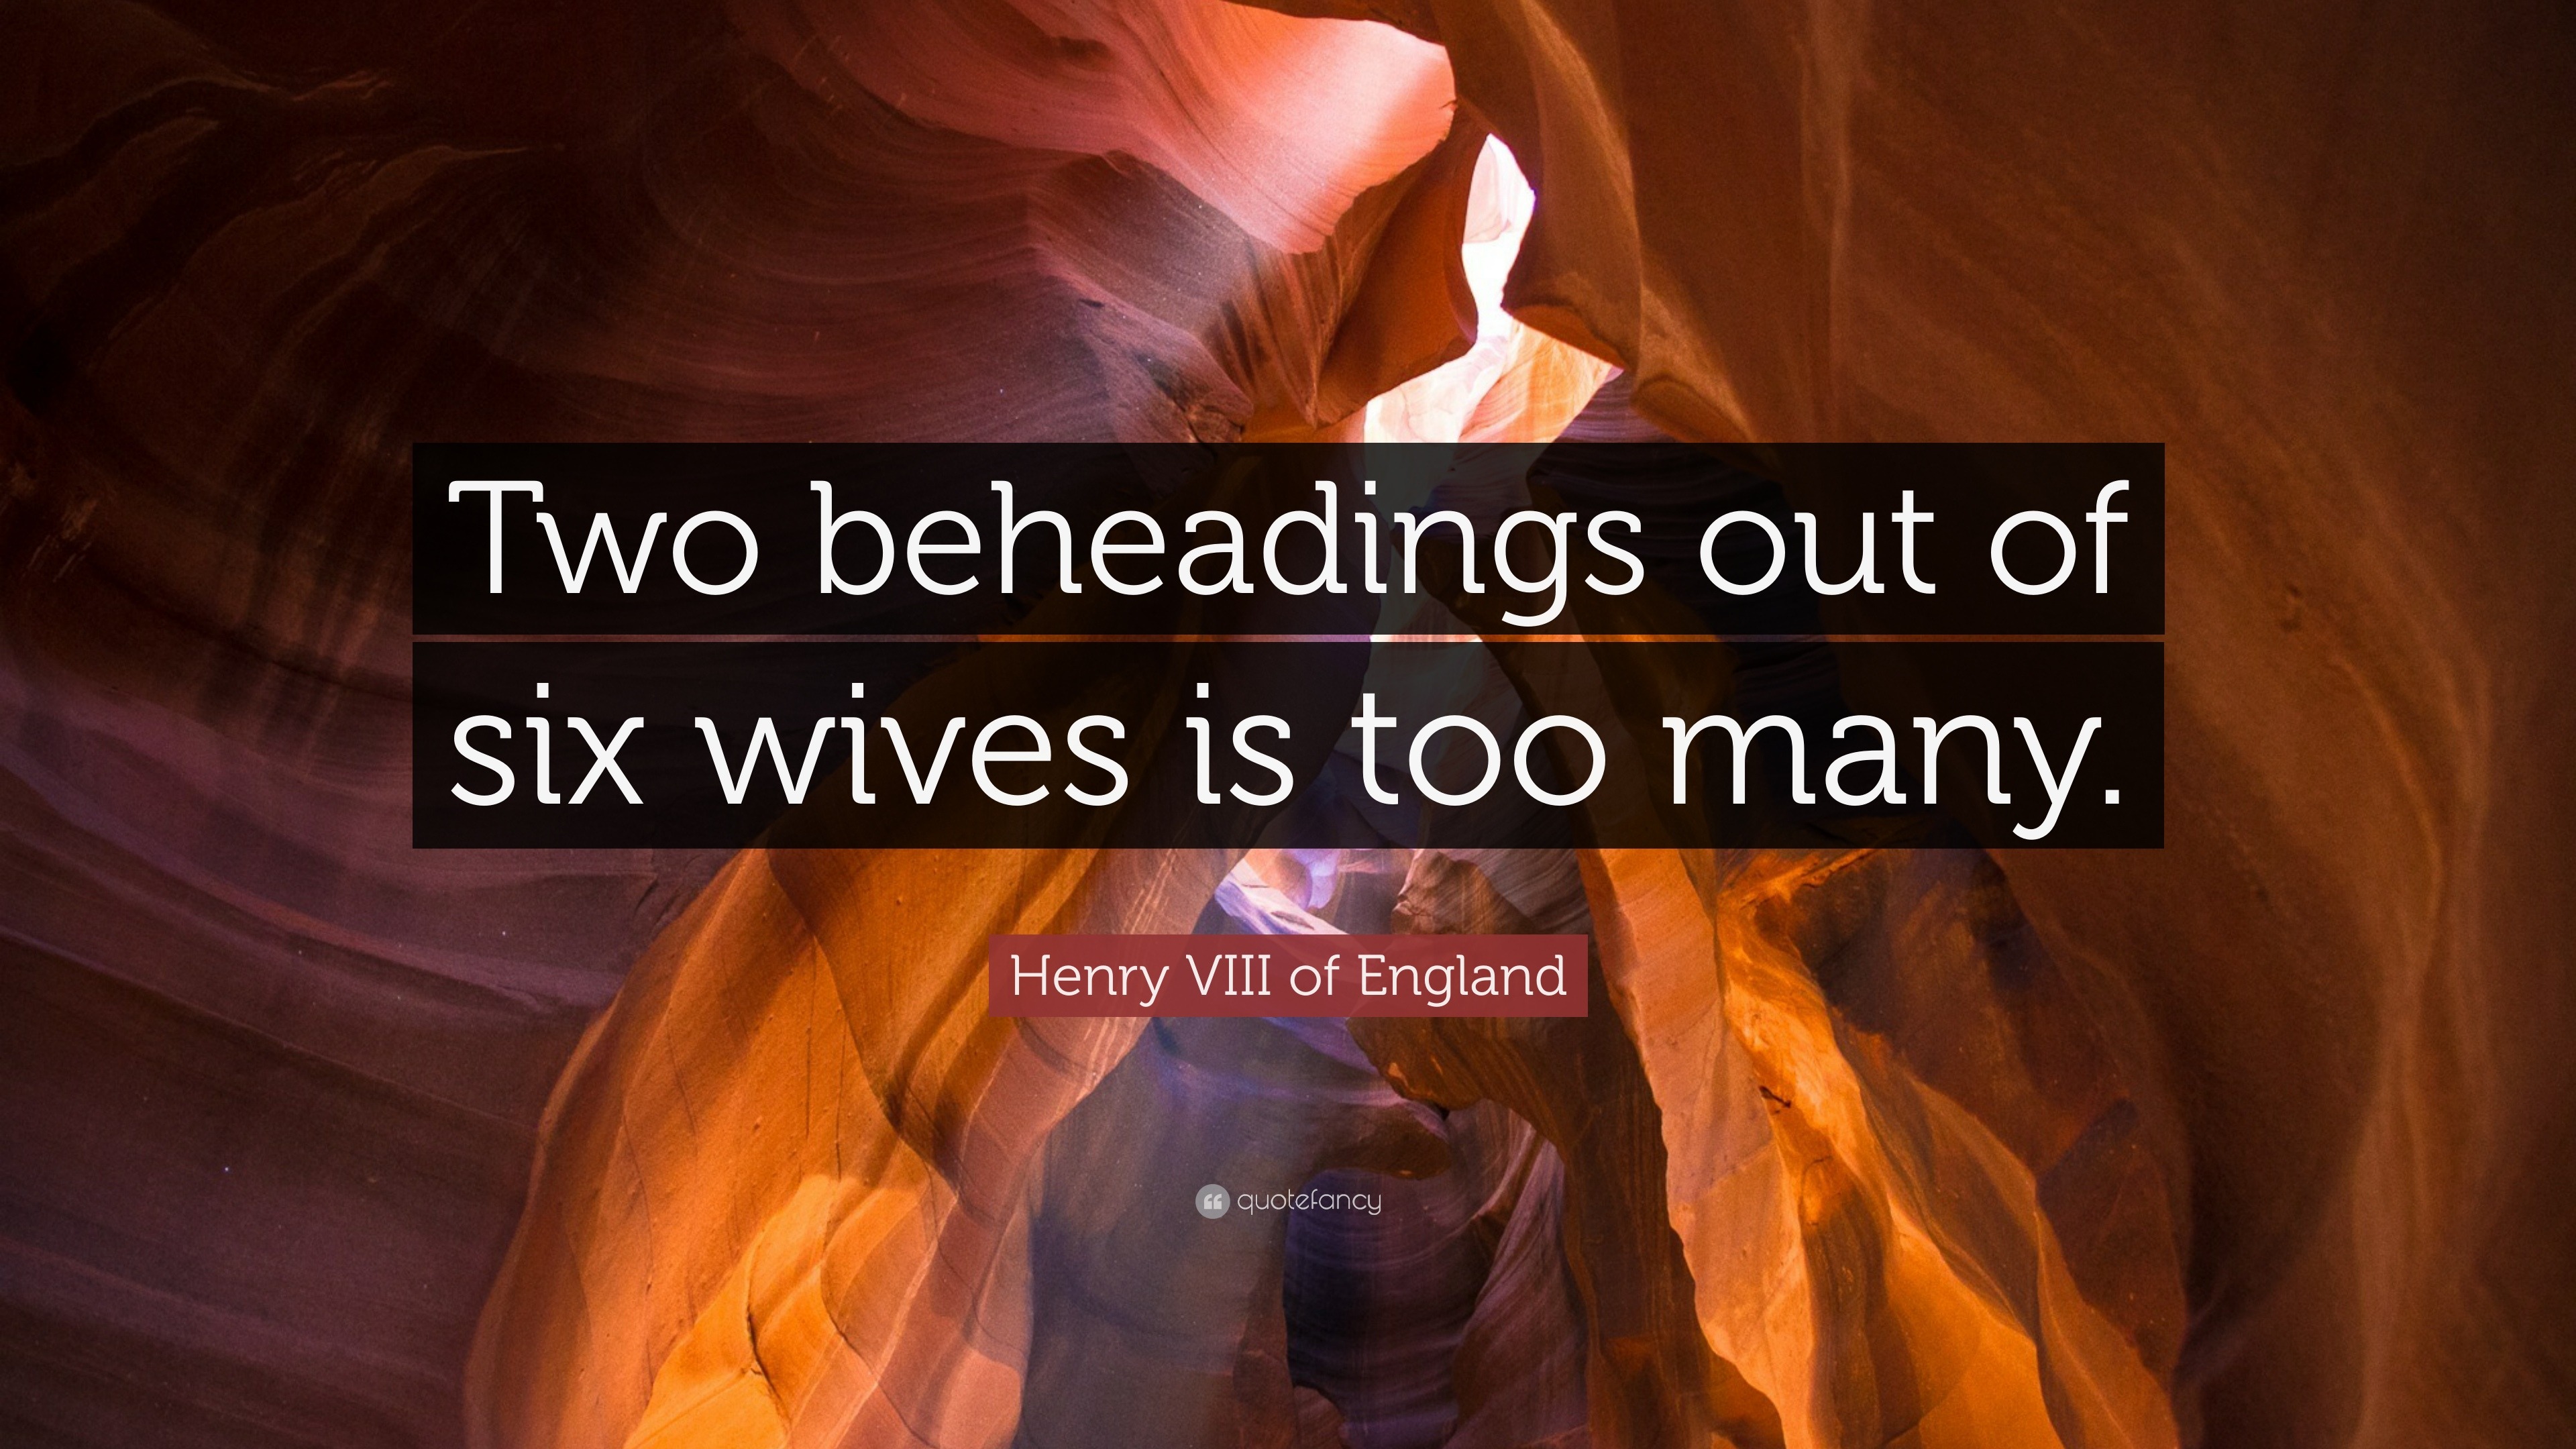 Henry VIII of England Quote “Two beheadings out of six wives is too many.”